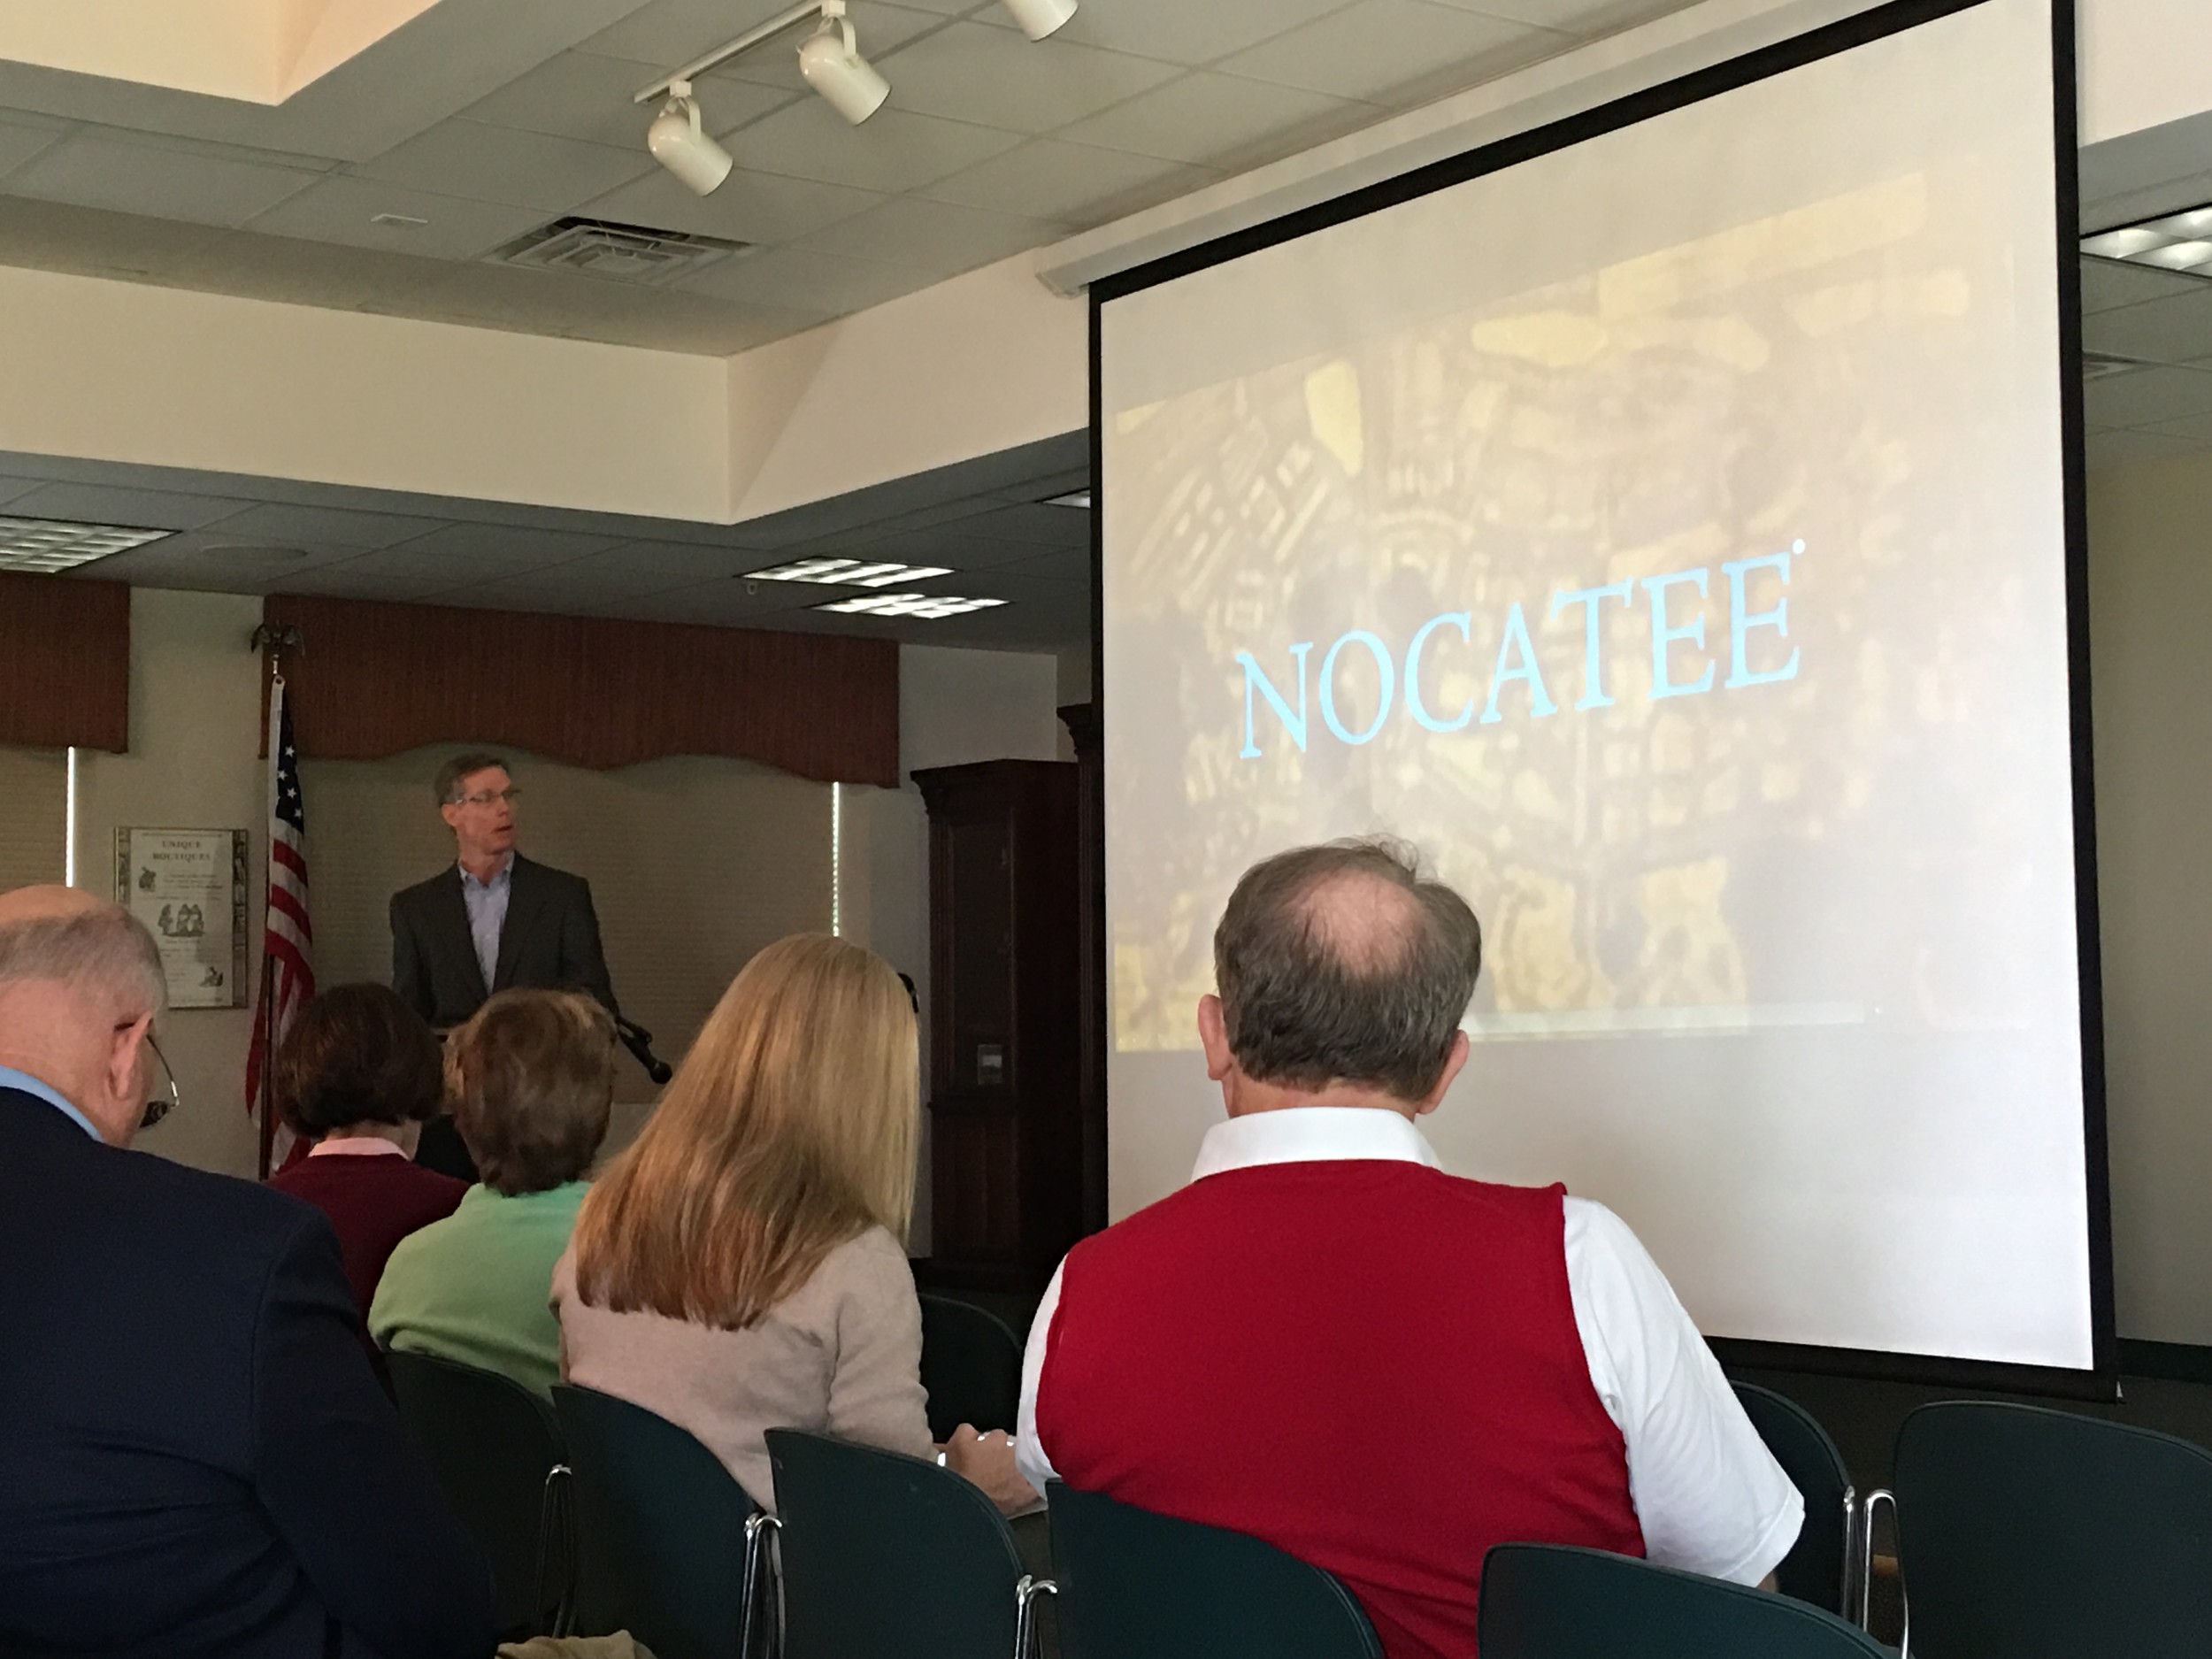 Greg Barbour, Chief Operating Officer and Partner at the PARC Group, spoke to those gathered Monday about the history of Nocatee and where the developers see the master-planned community going in the future.